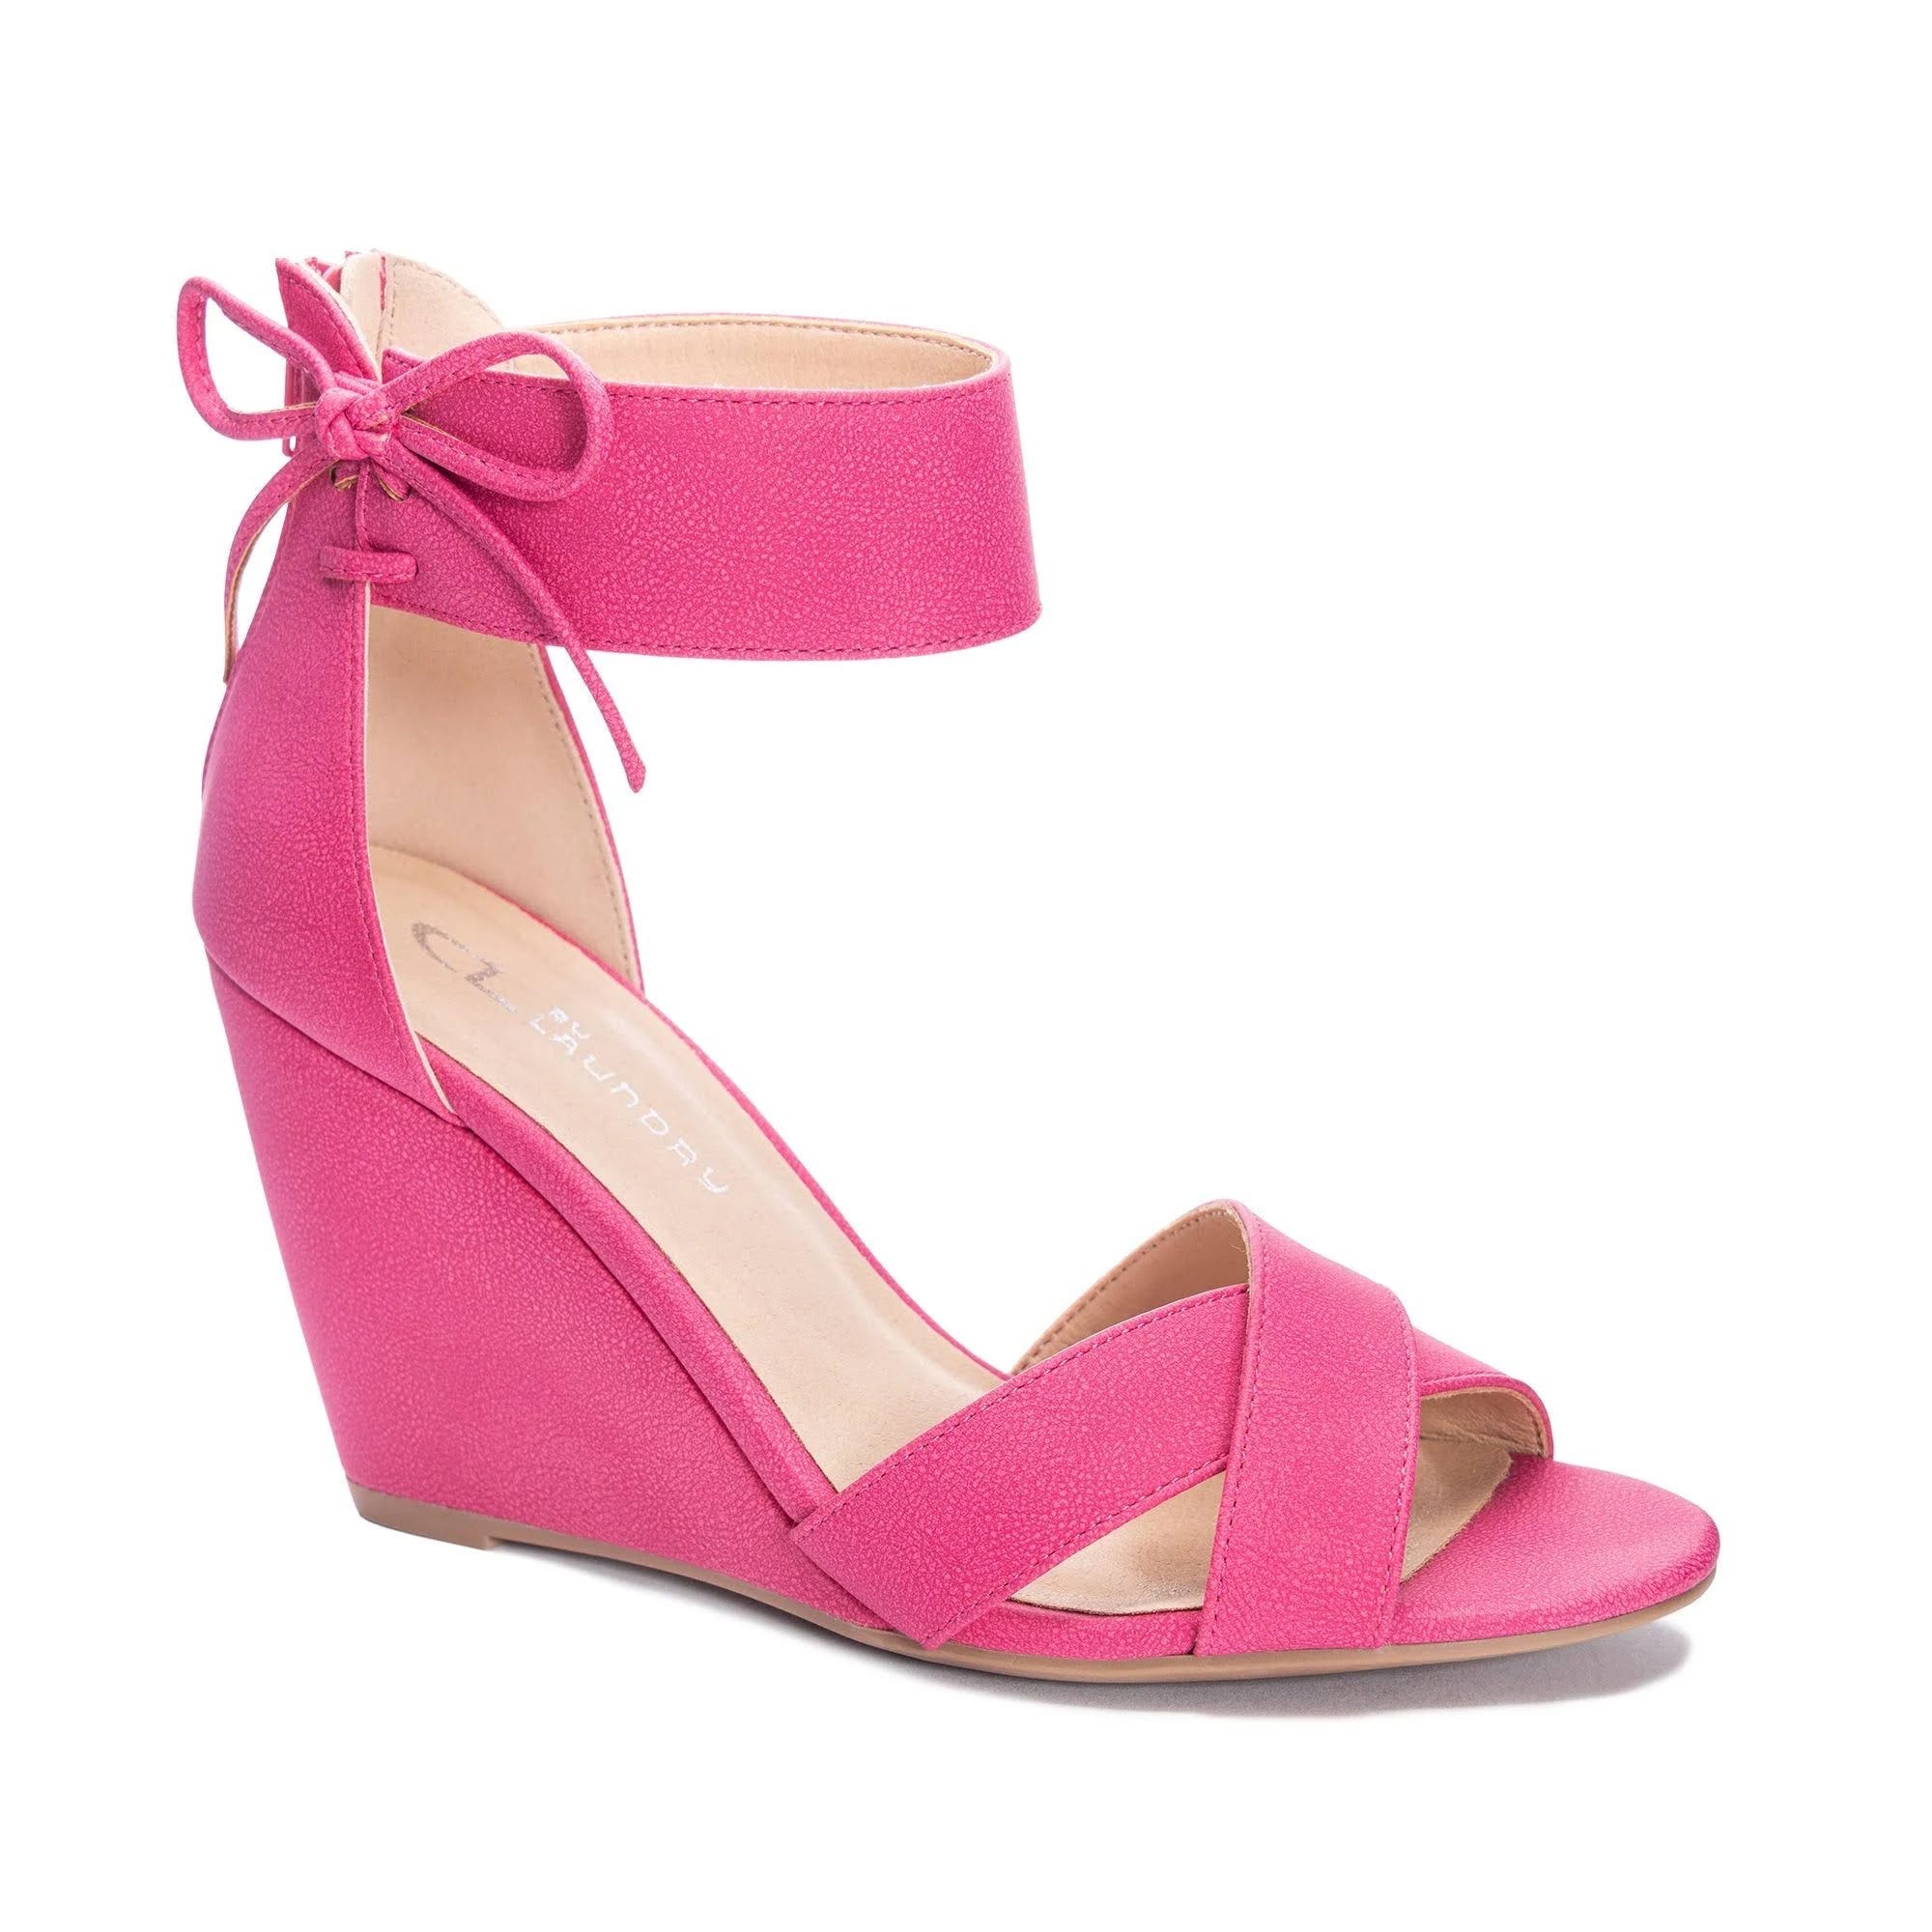 Fuchsia Platform Sandals with Bow Ankle Strap | Image